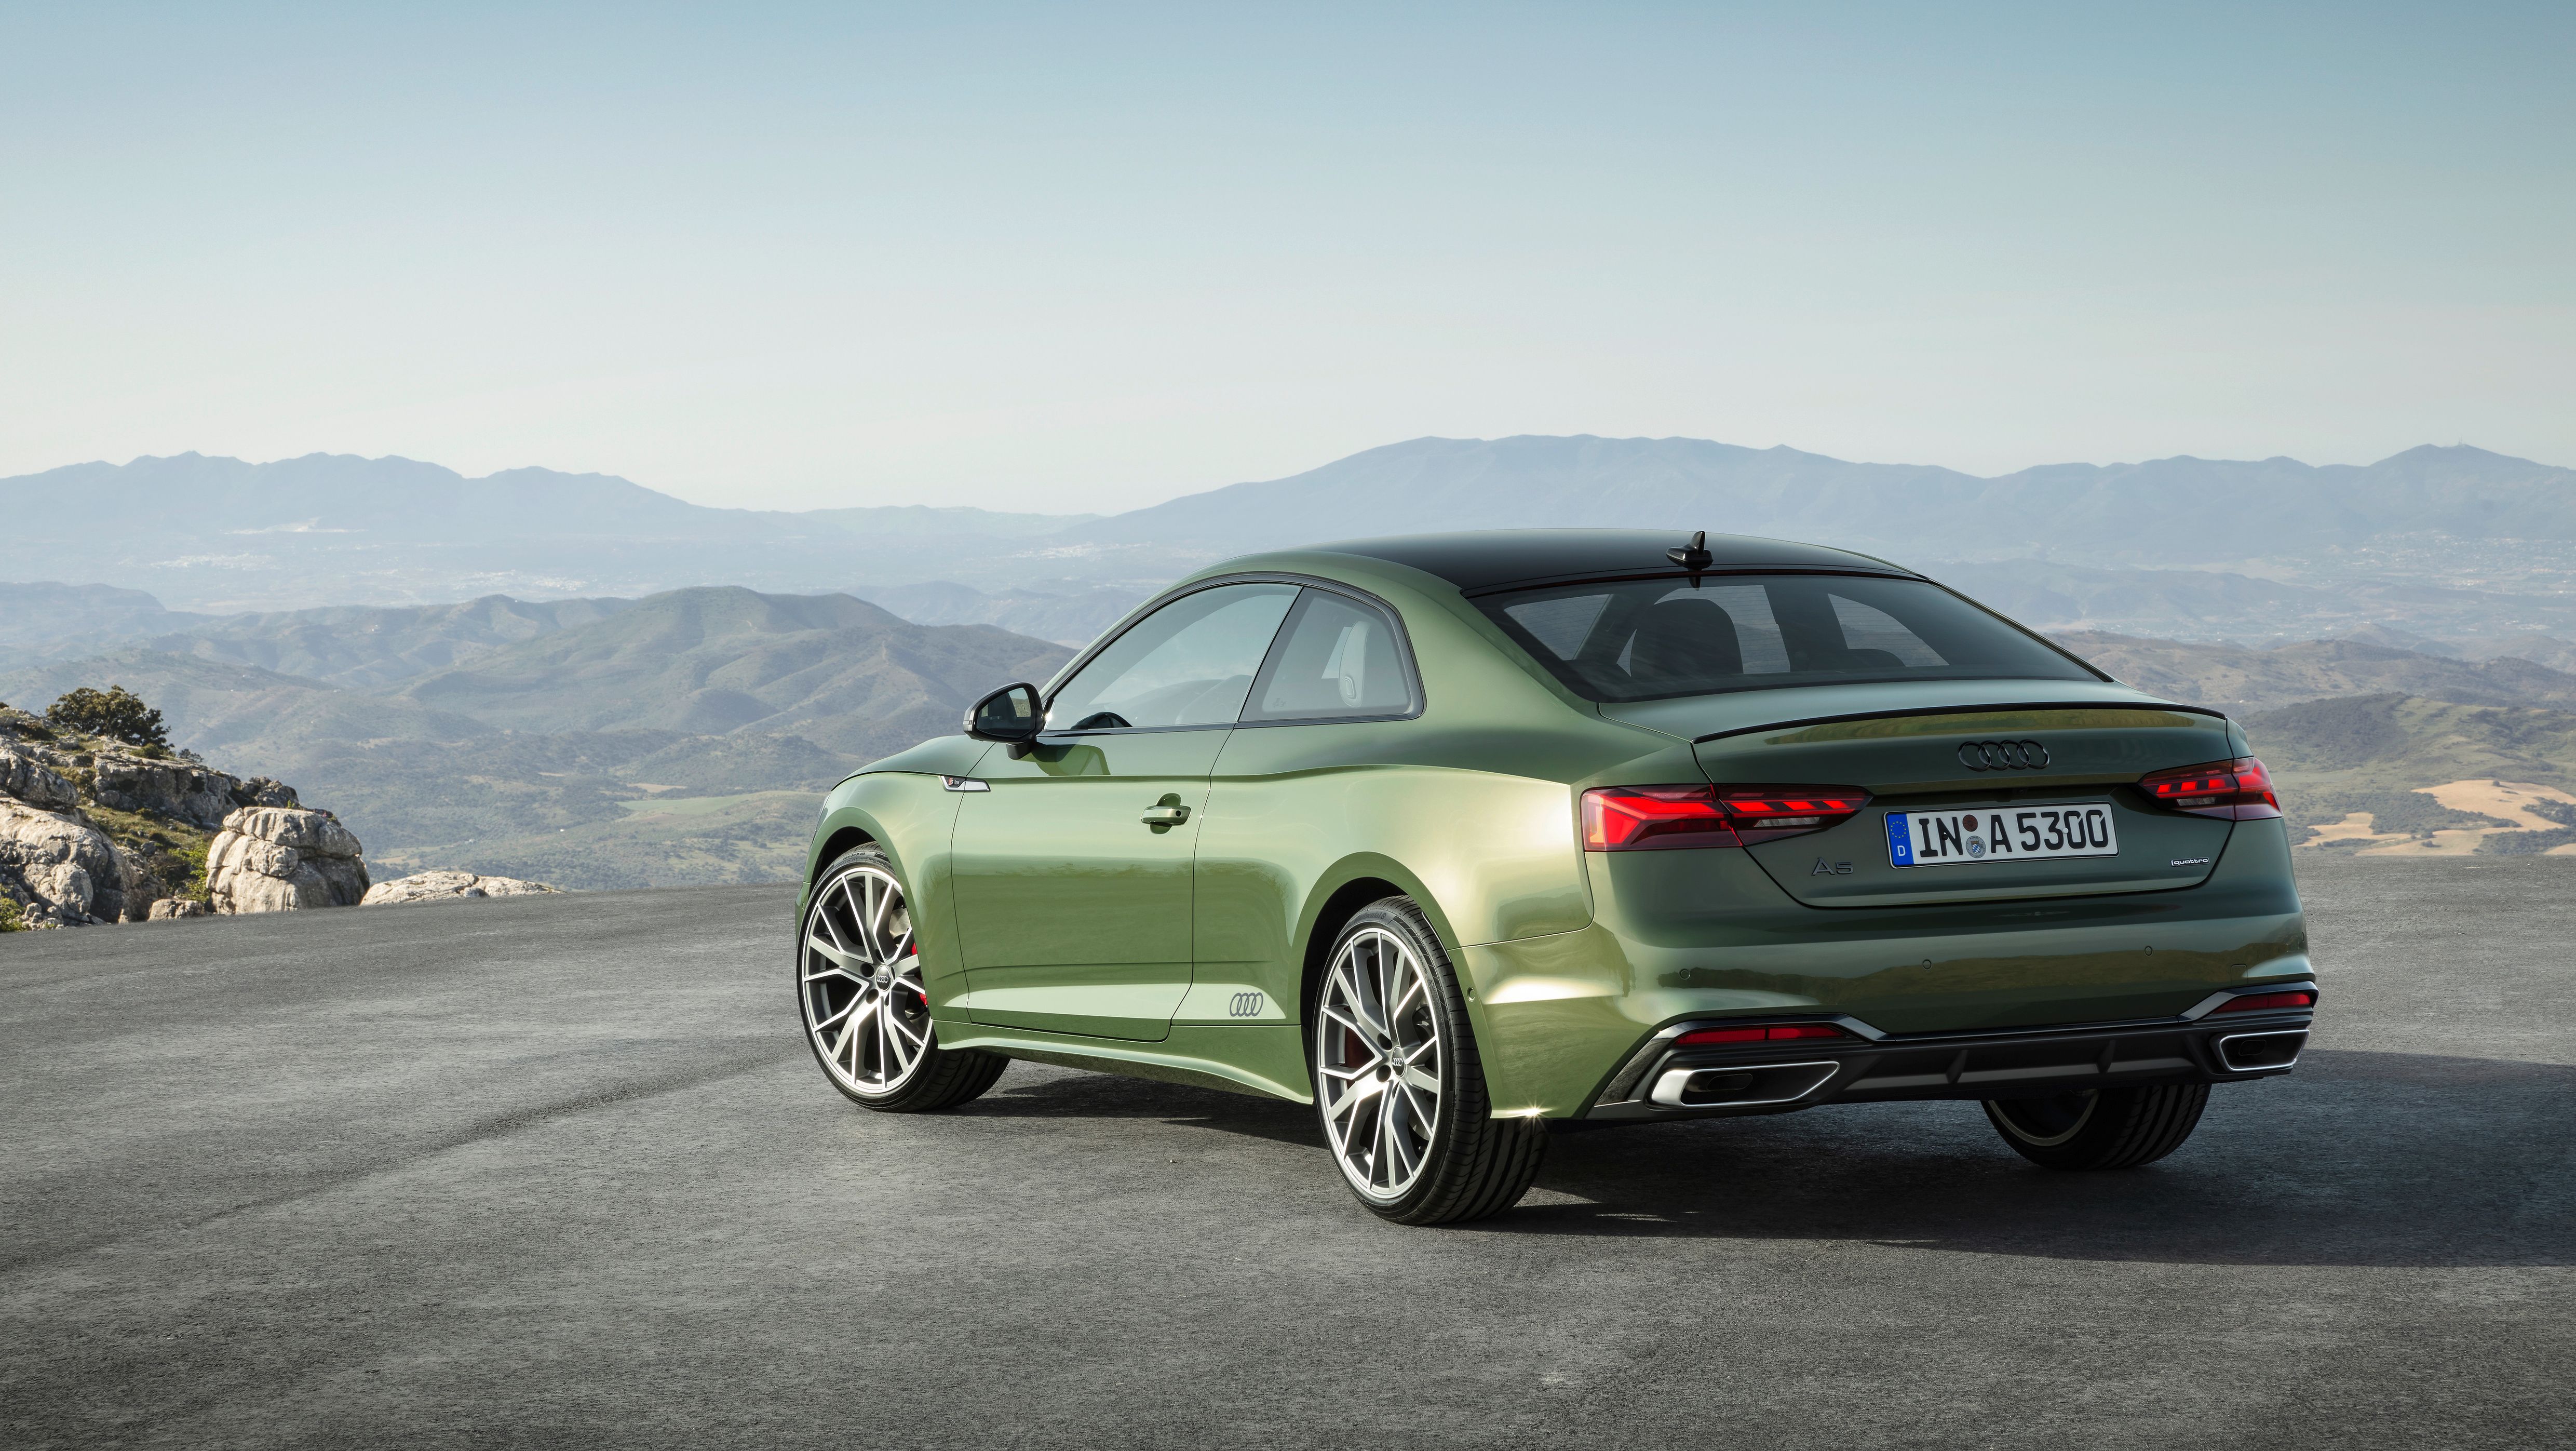 7 Best Reasons Why You Should Buy an Audi A5